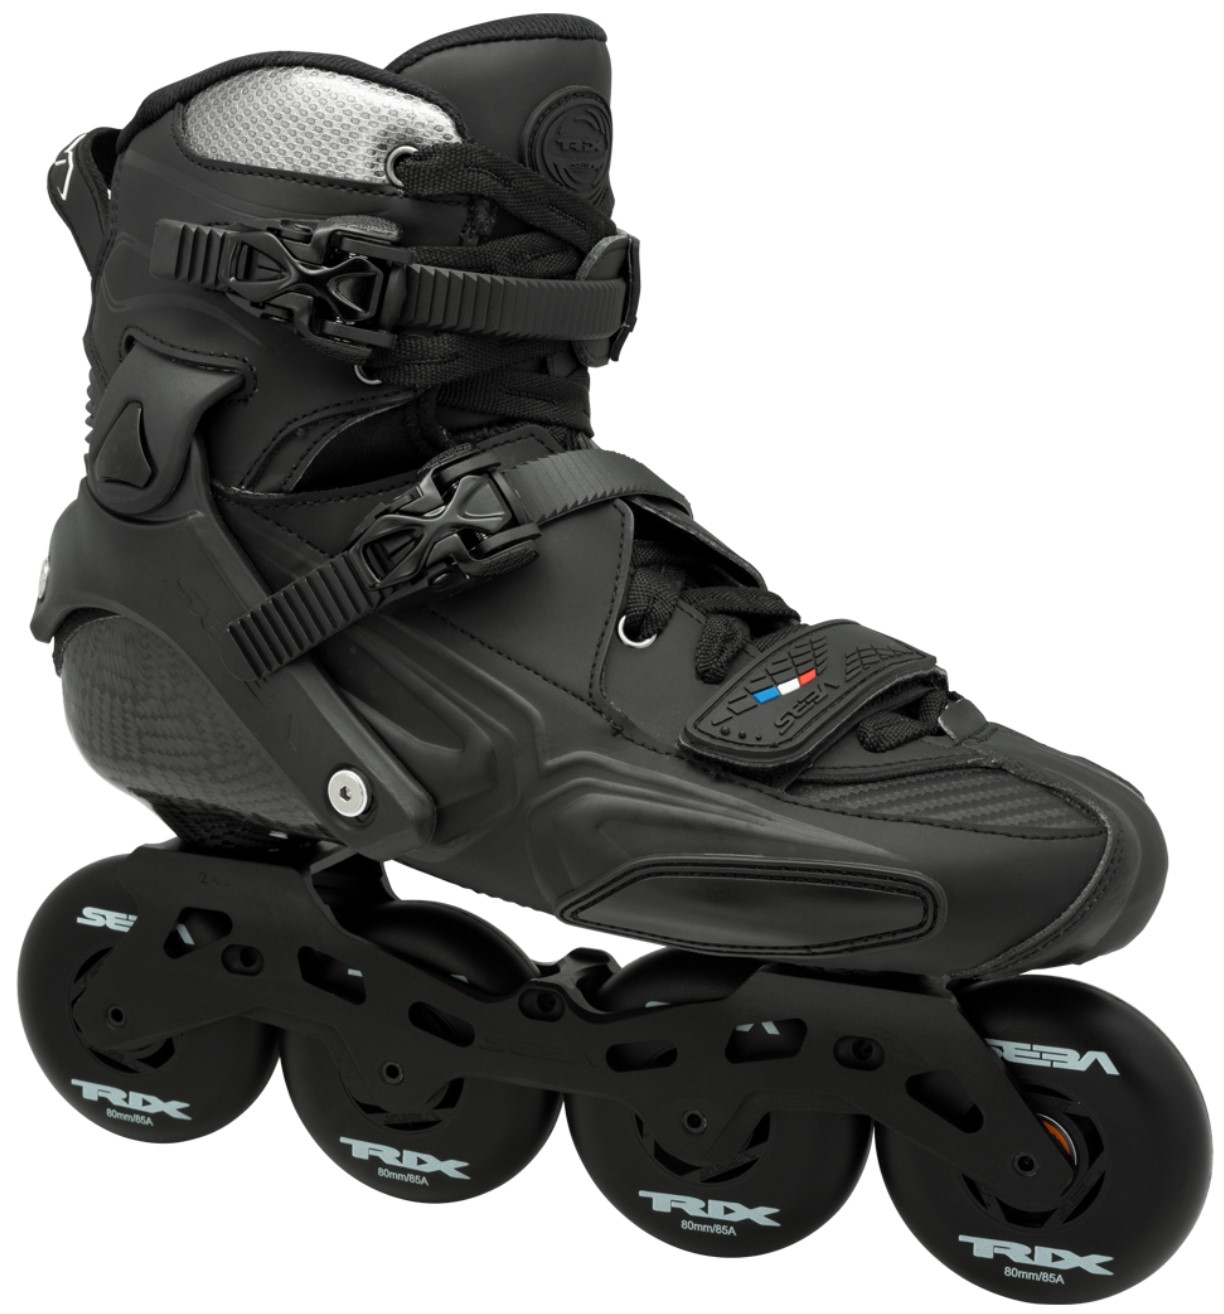 Seba Trix 80 Black inline skate for slalom and freestyle inline skating with 4 Trix wheels of 80 mm